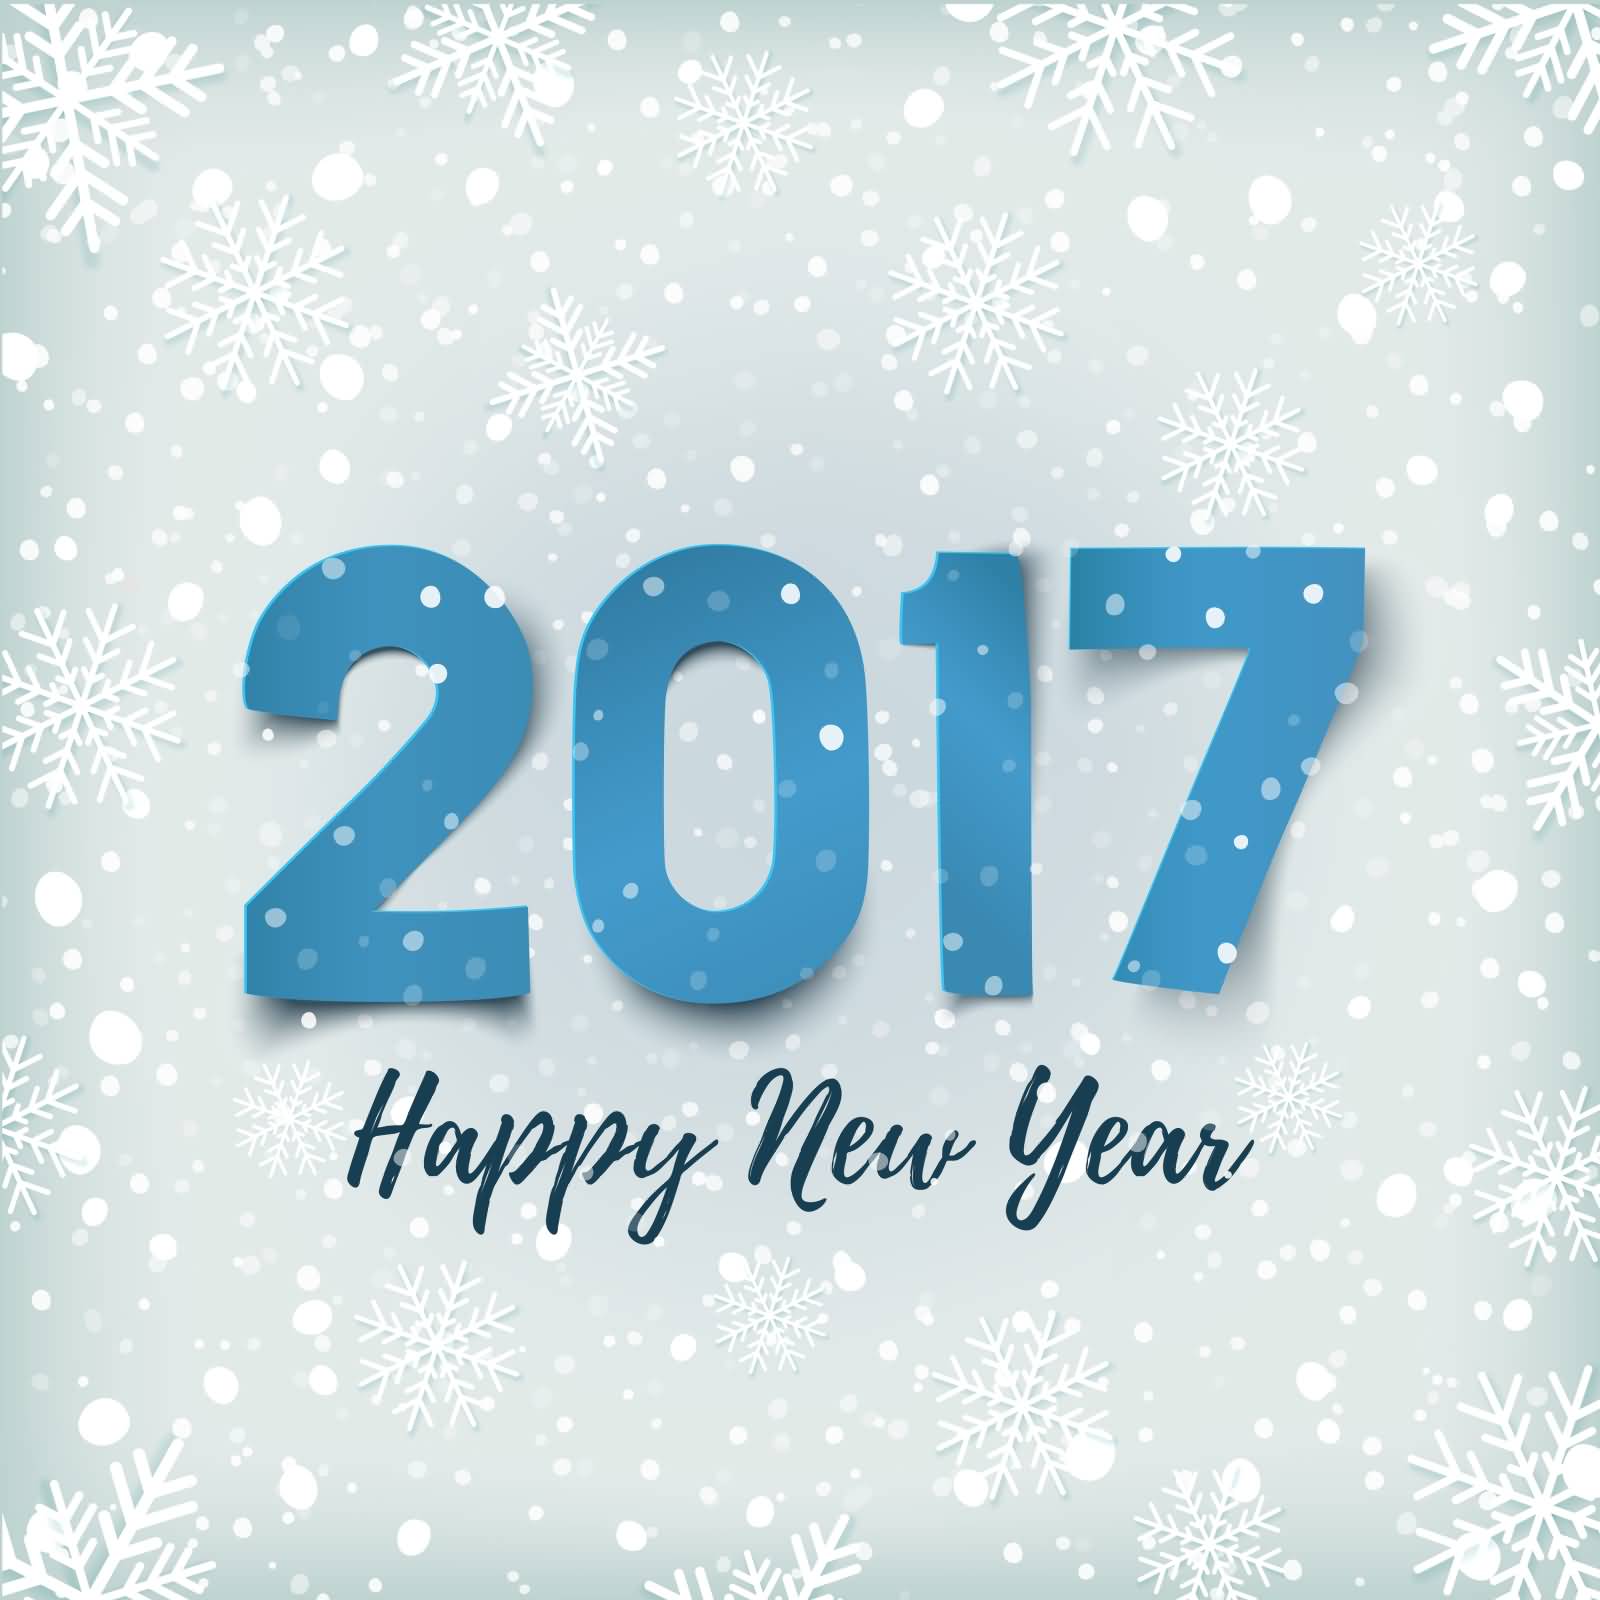 2017 Happy New Year Snowflakes Design Greeting Card